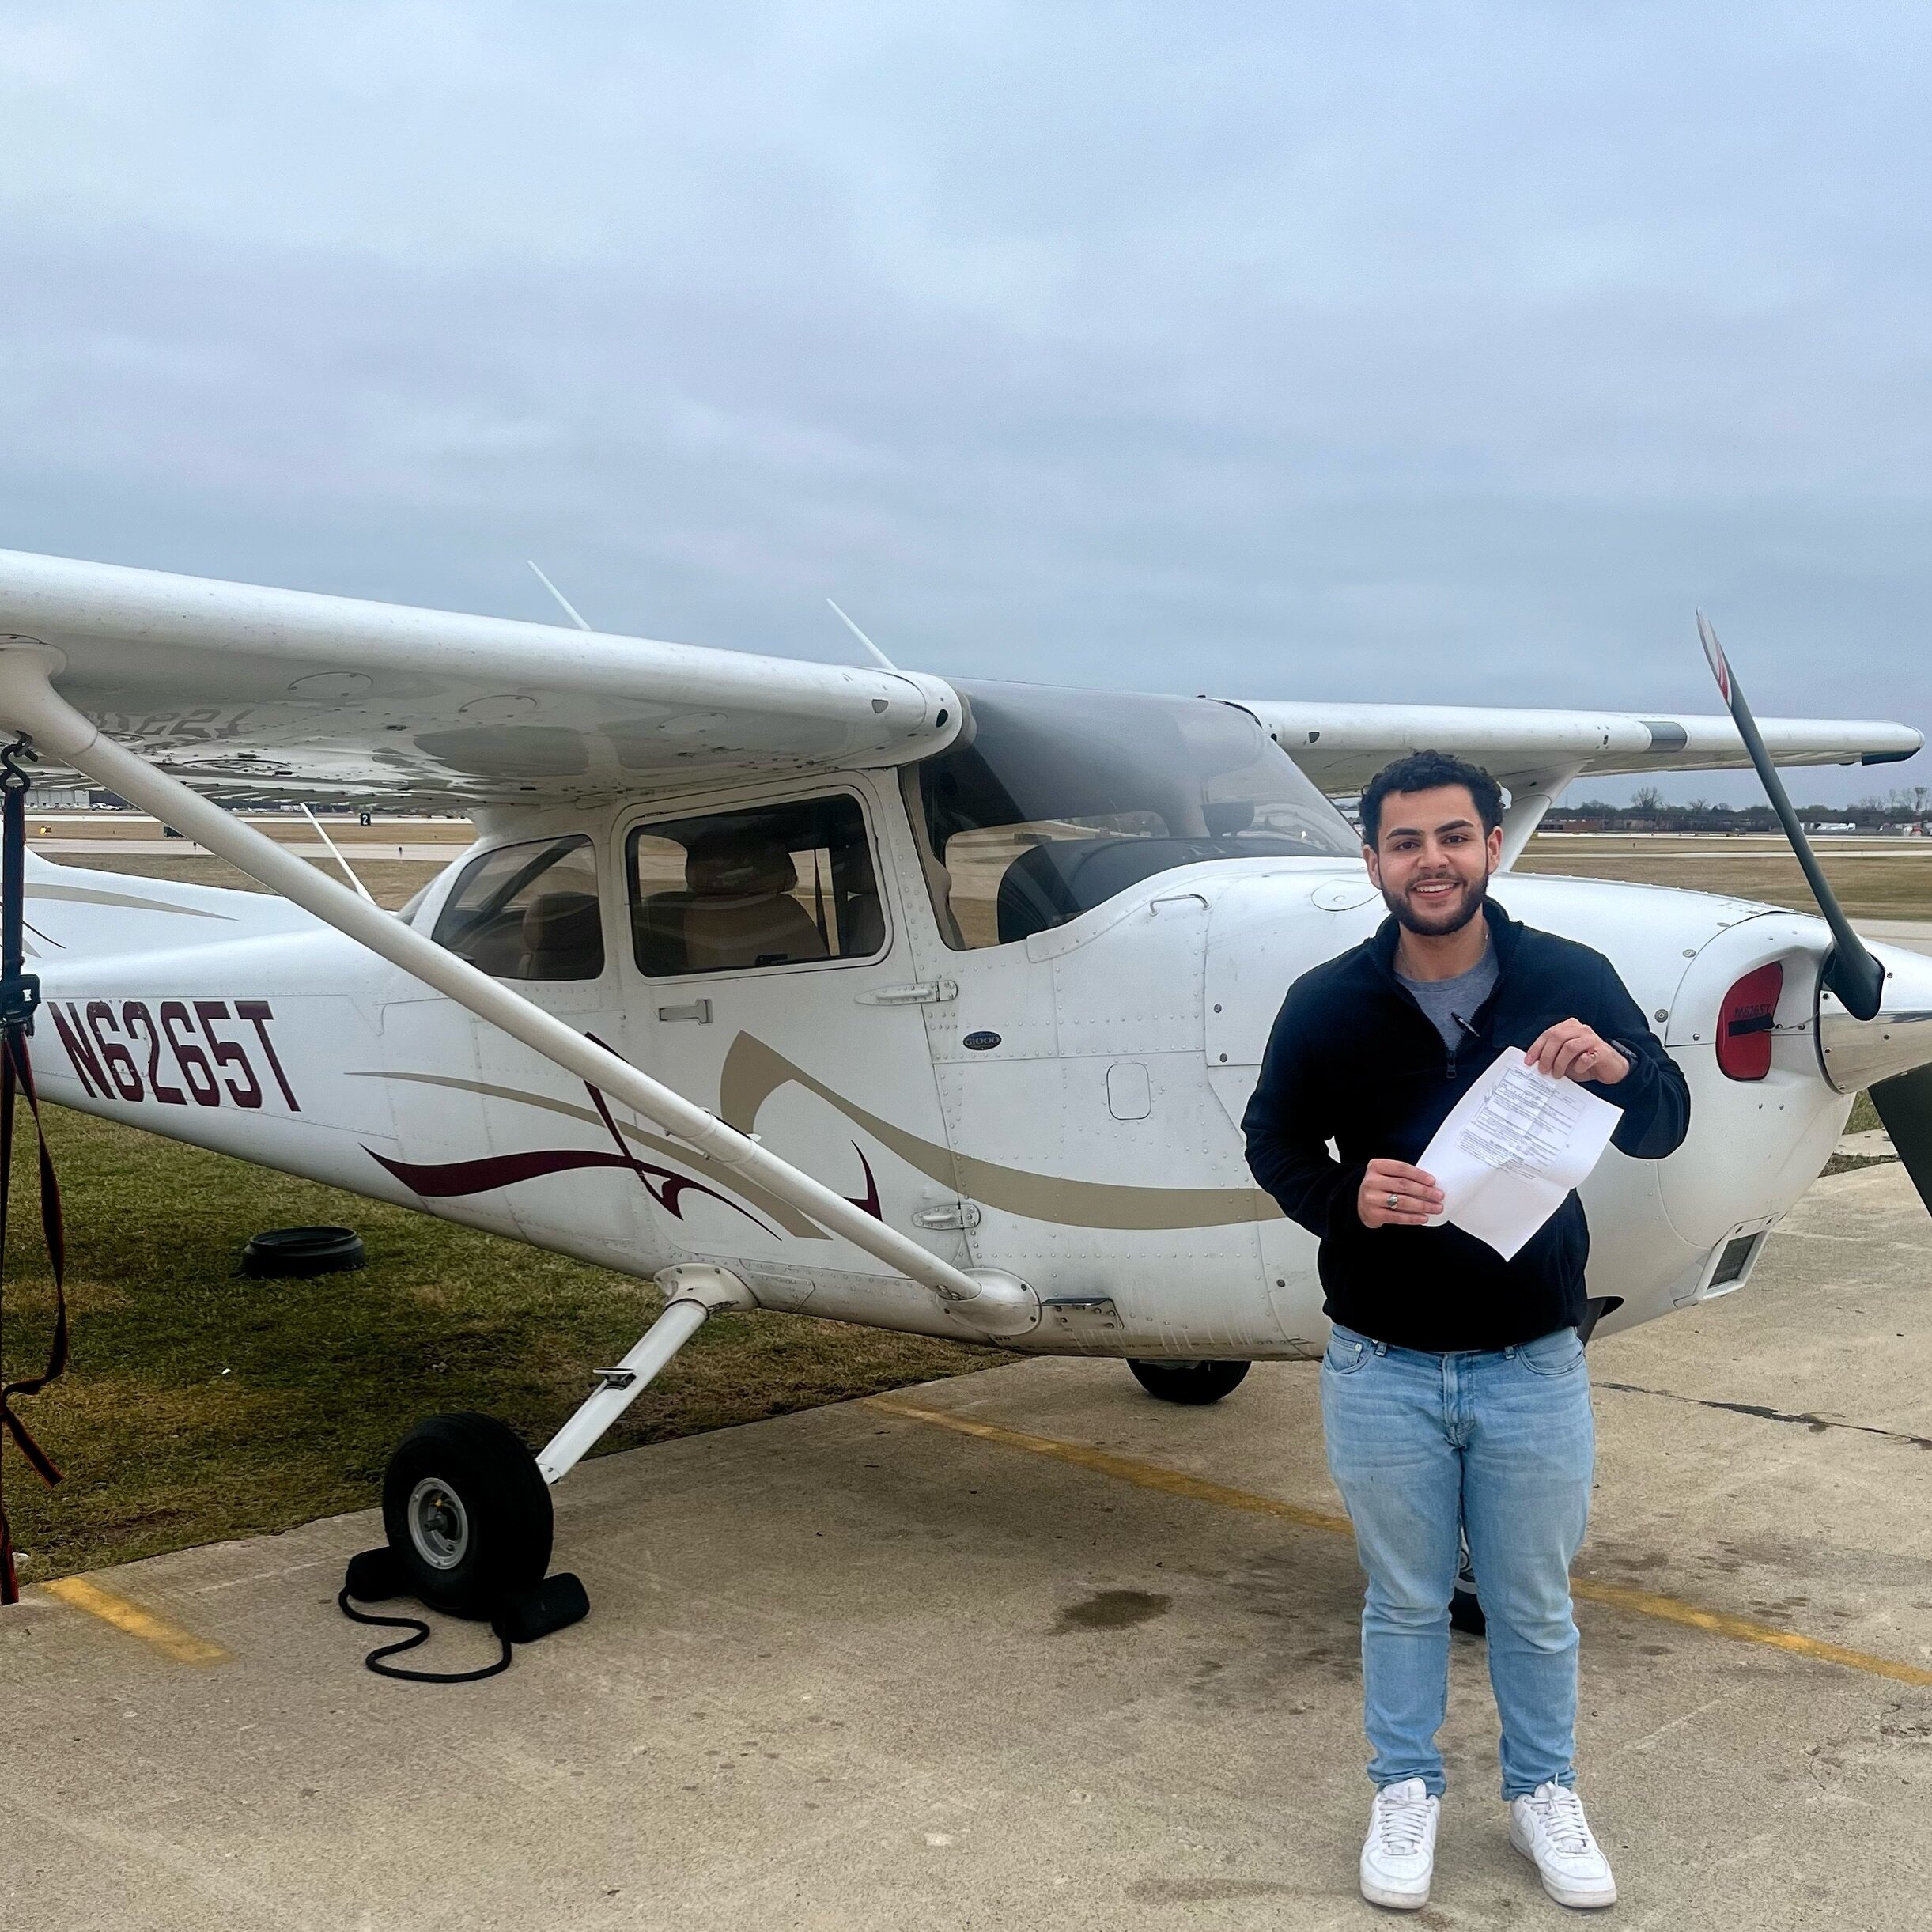 Congratulations to our instructor Mohamed on passing his CFII check ride yesterday! 🥳🥳🥳
.
.
.
#flighttraining #pilot #flightinstructor #aviation